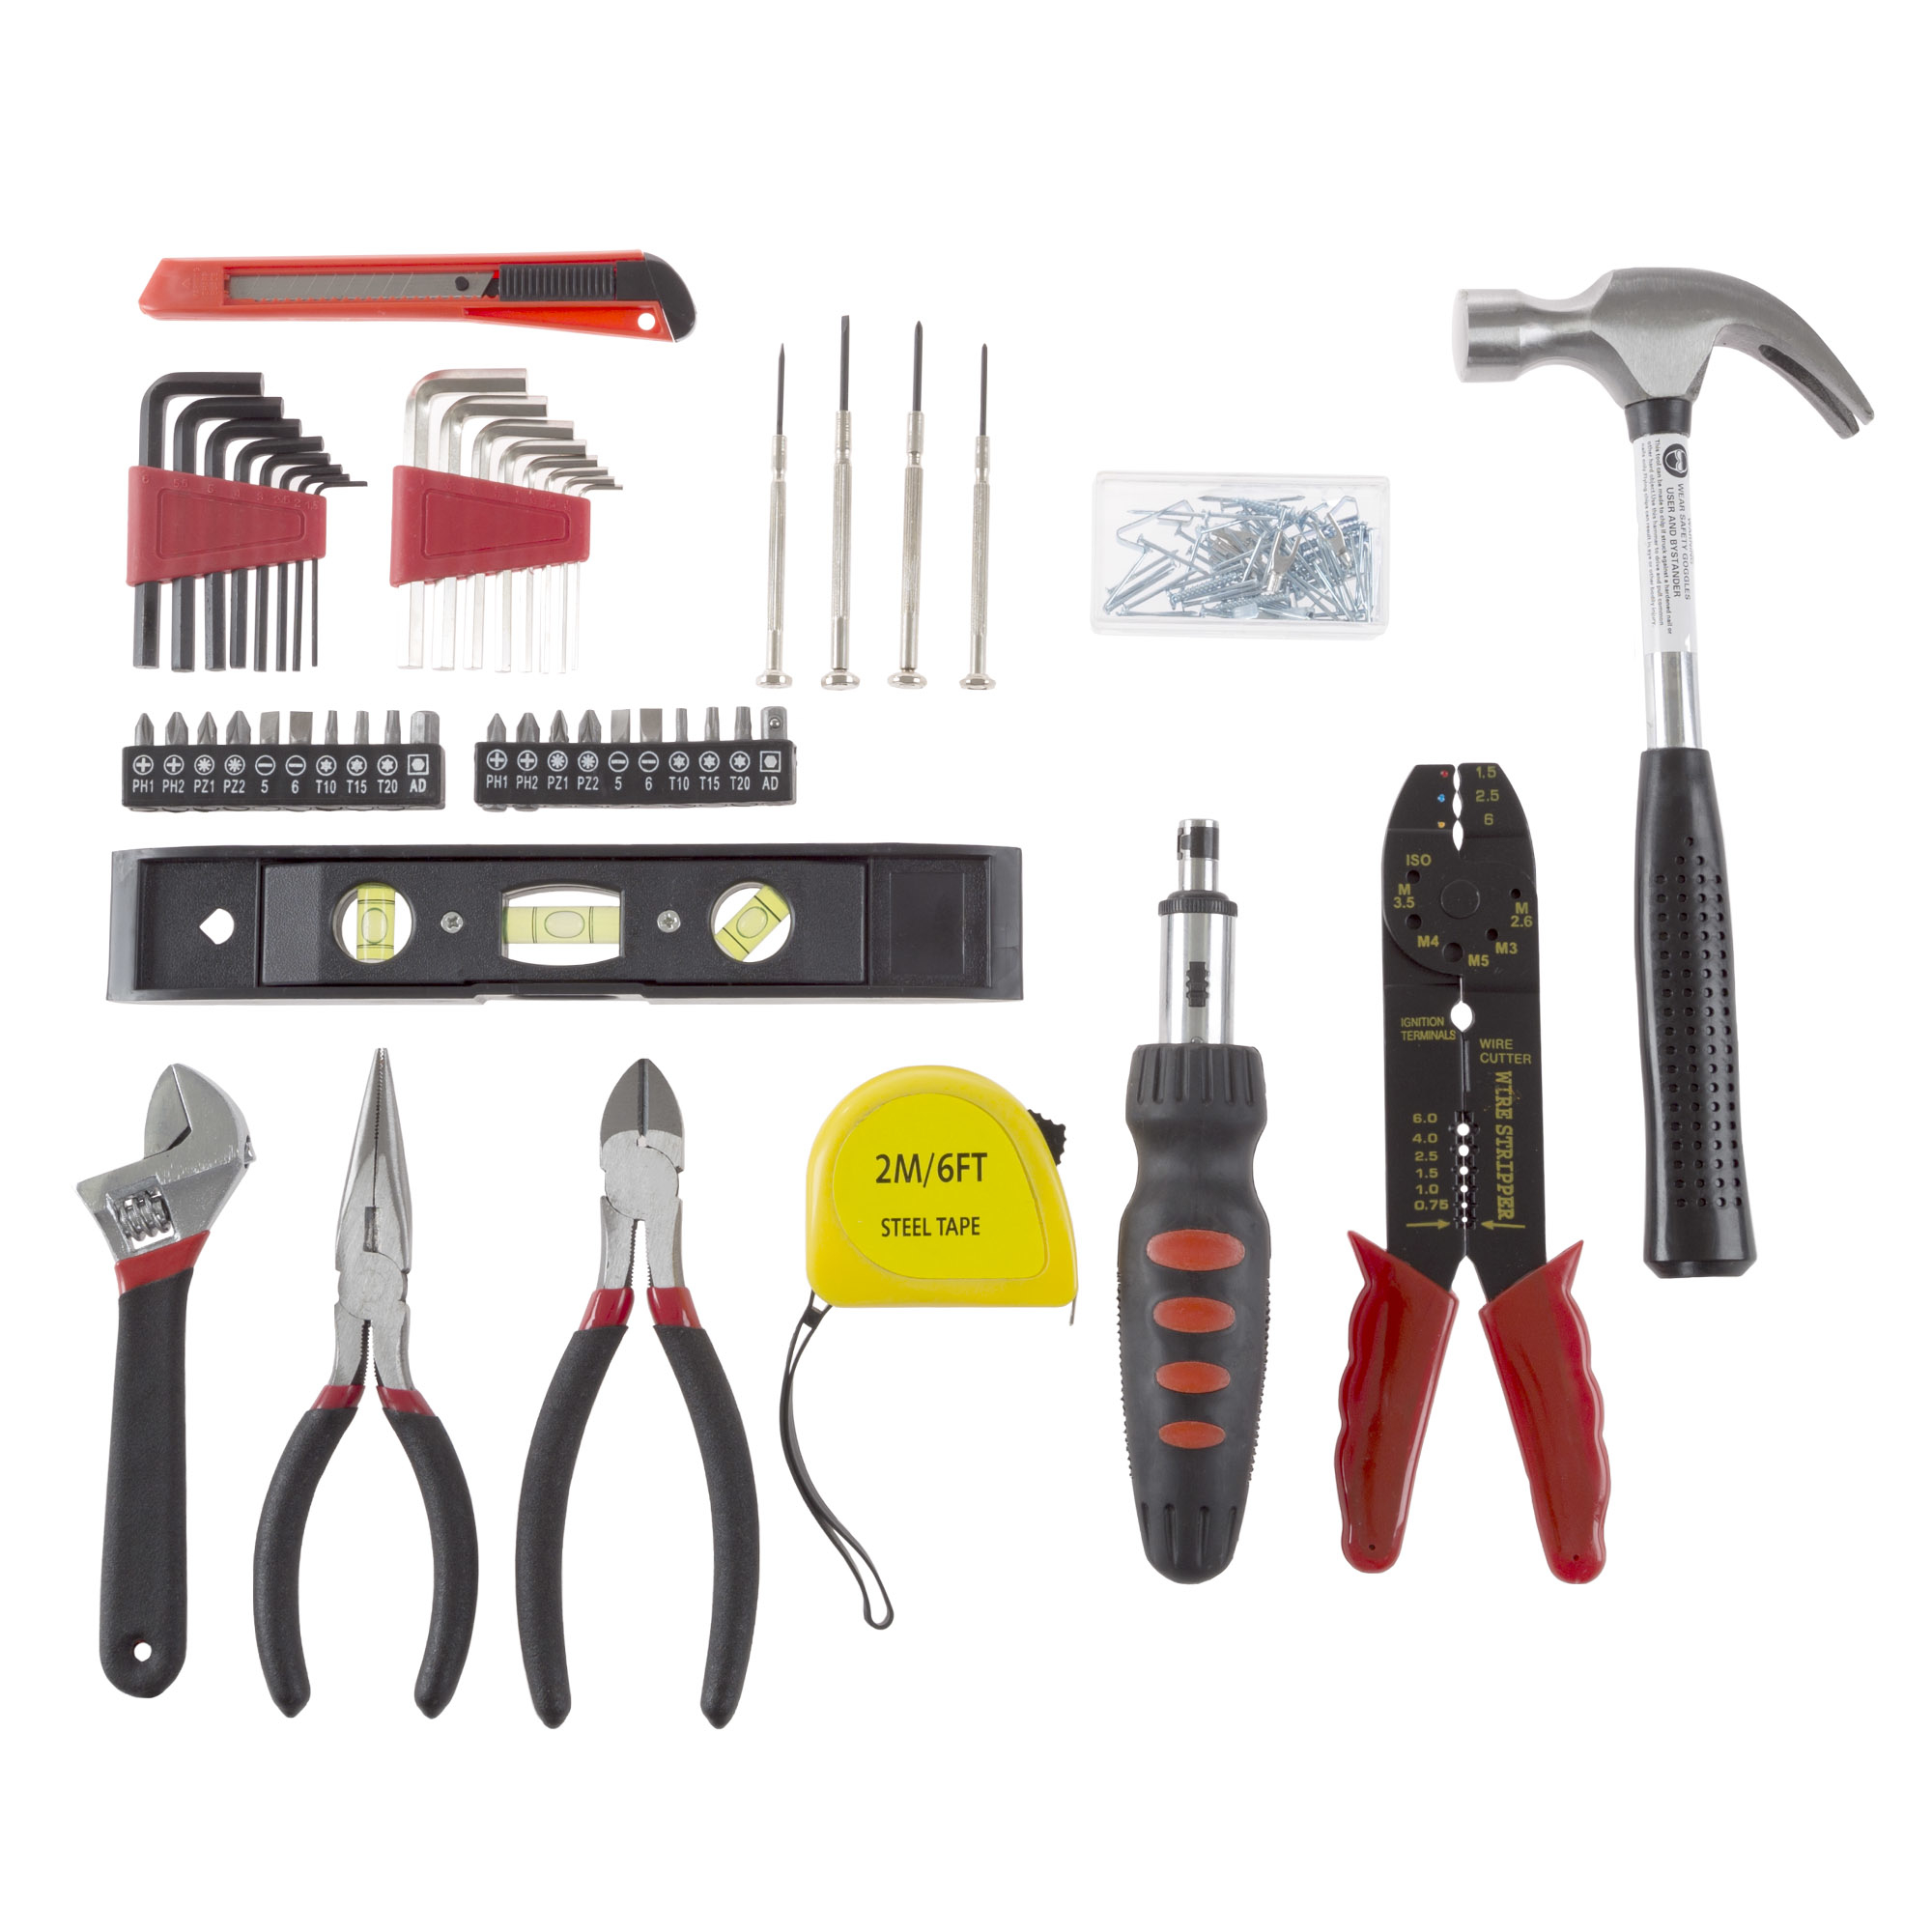 Essential Hand Tool Kit & Hard-Sided Case DIY Complete Kit